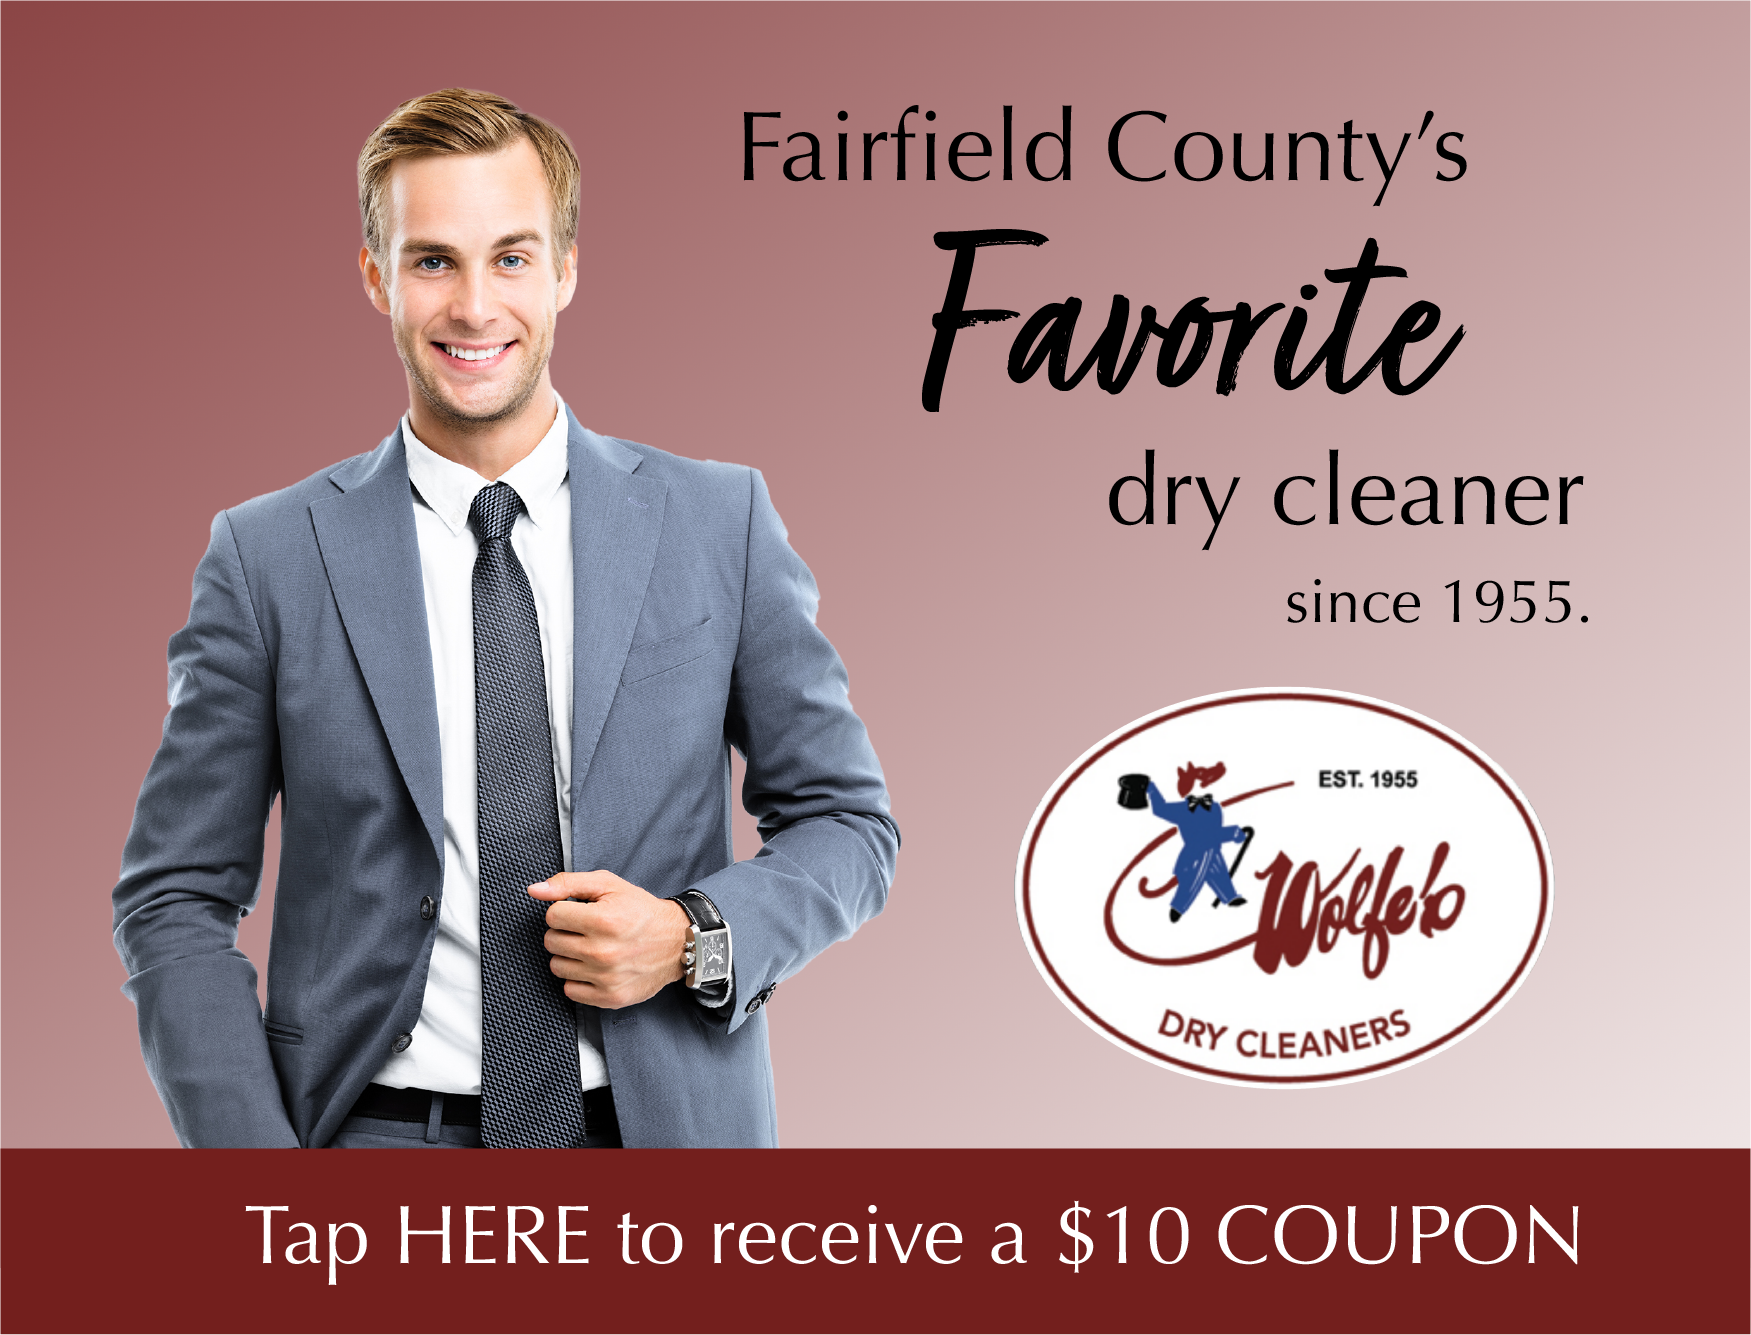 Wolfe's Dry Cleaners